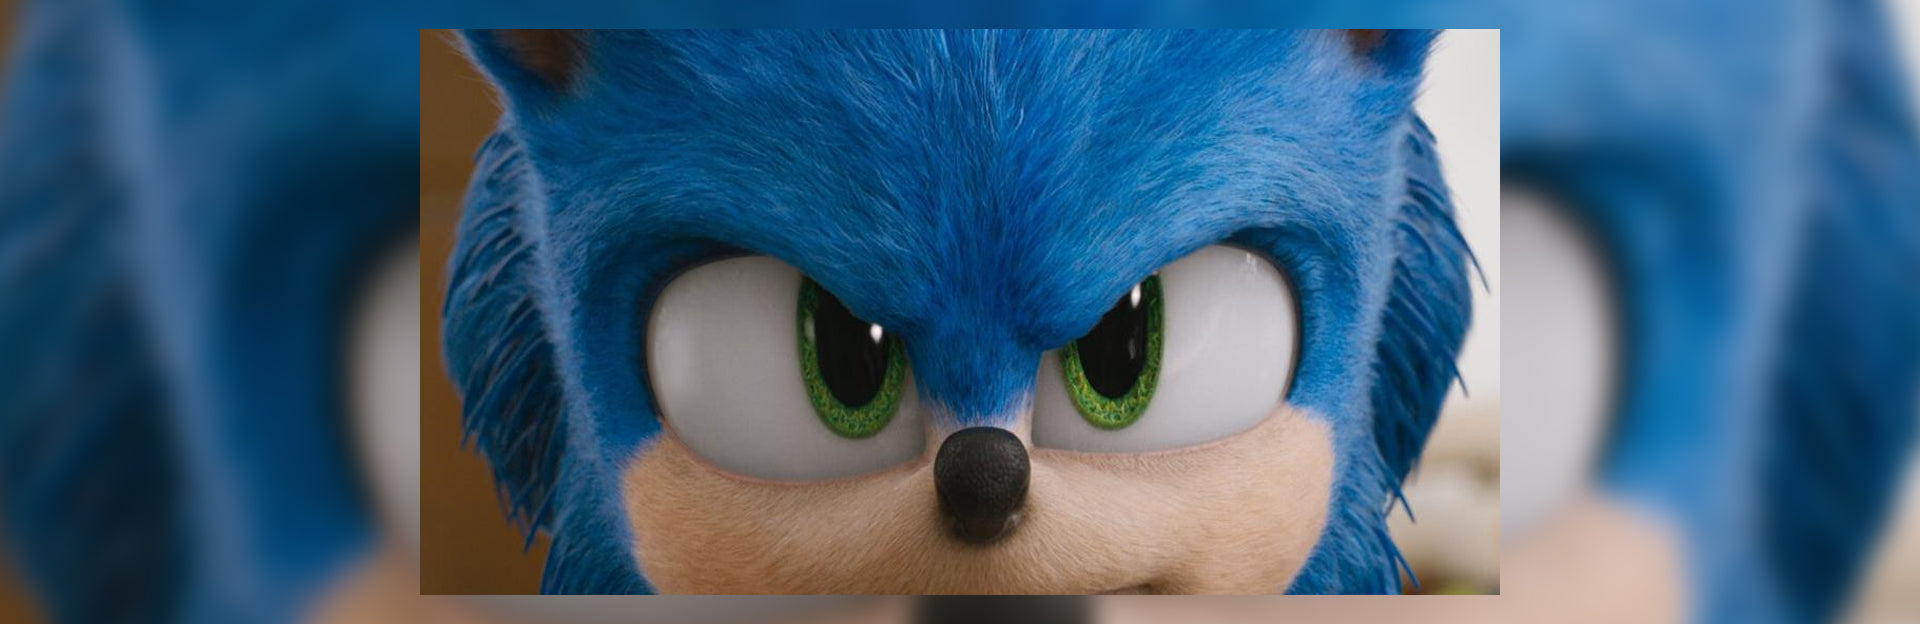 Movie Sonic + 7 Chaos Emeralds = ? What Is The Outcome? 